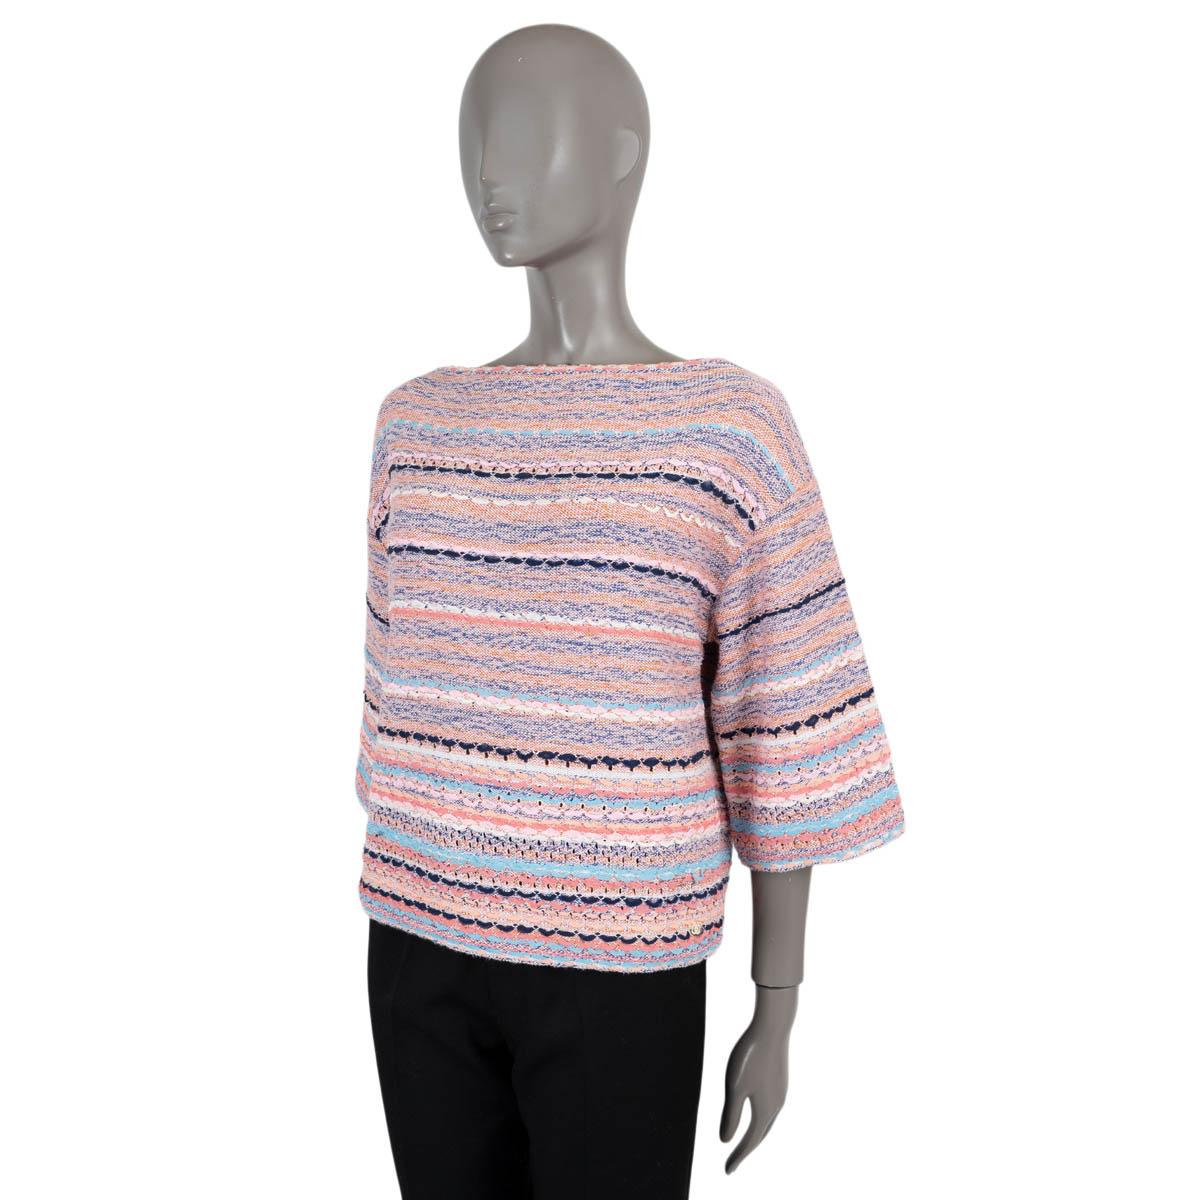 100% authentic Chanel sweater in pink, orange, navy, light blue, white and coralle silk (61%), cotton (36%) and cashmere (3%) with ribbon stripes woven in. Features a boat neck, dropped shoulders and wide 3/4 sleeve. Unlined. Has been worn and is in